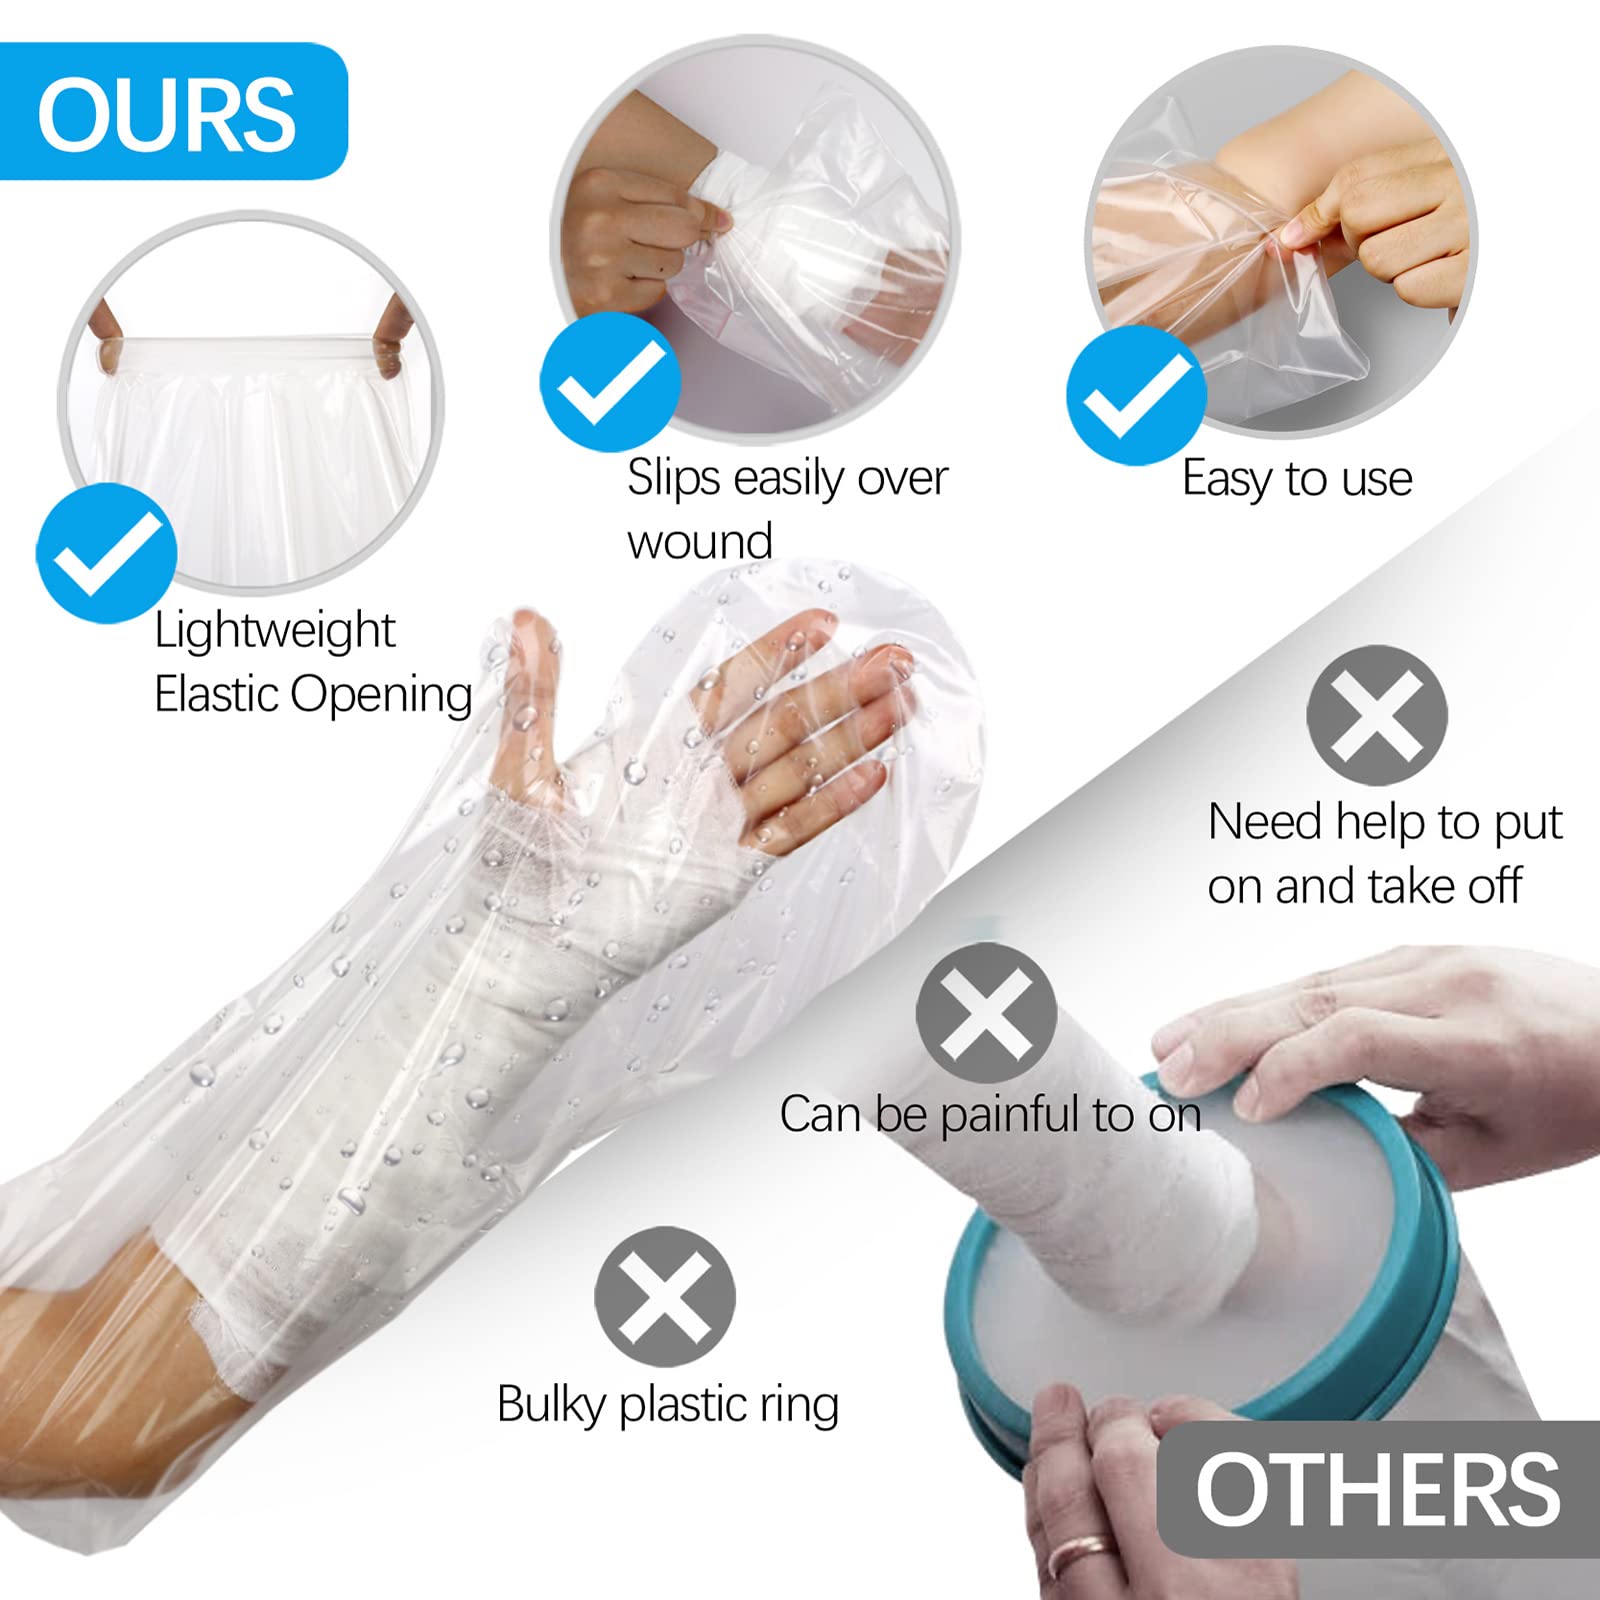 Naiiling Waterproof Cast Cover Arm, Cast Covers for Shower Arm, Adult Watertight Seal Cast Protector Cast Sleeve for Broken Surgery Wound Arm Elbow Hand Wrist - 2Pack